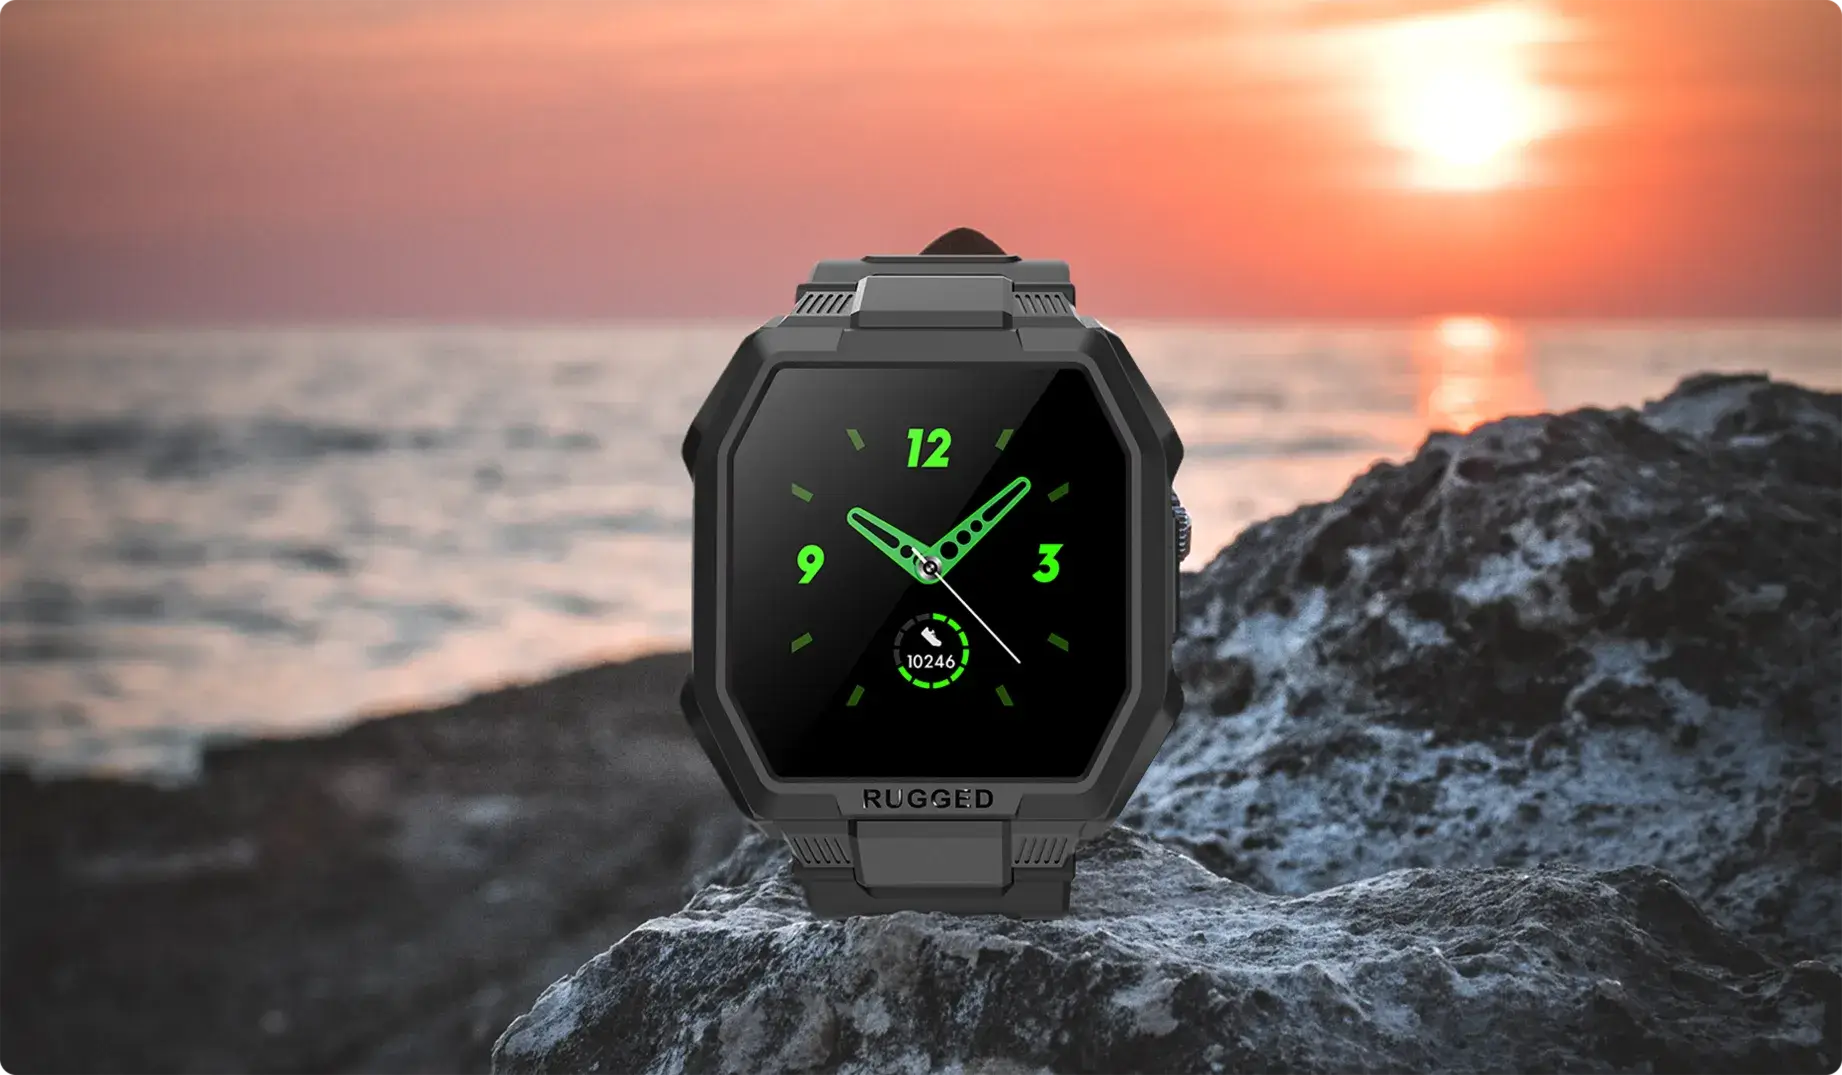 Blackview R6 smartwatch with GPS tracking